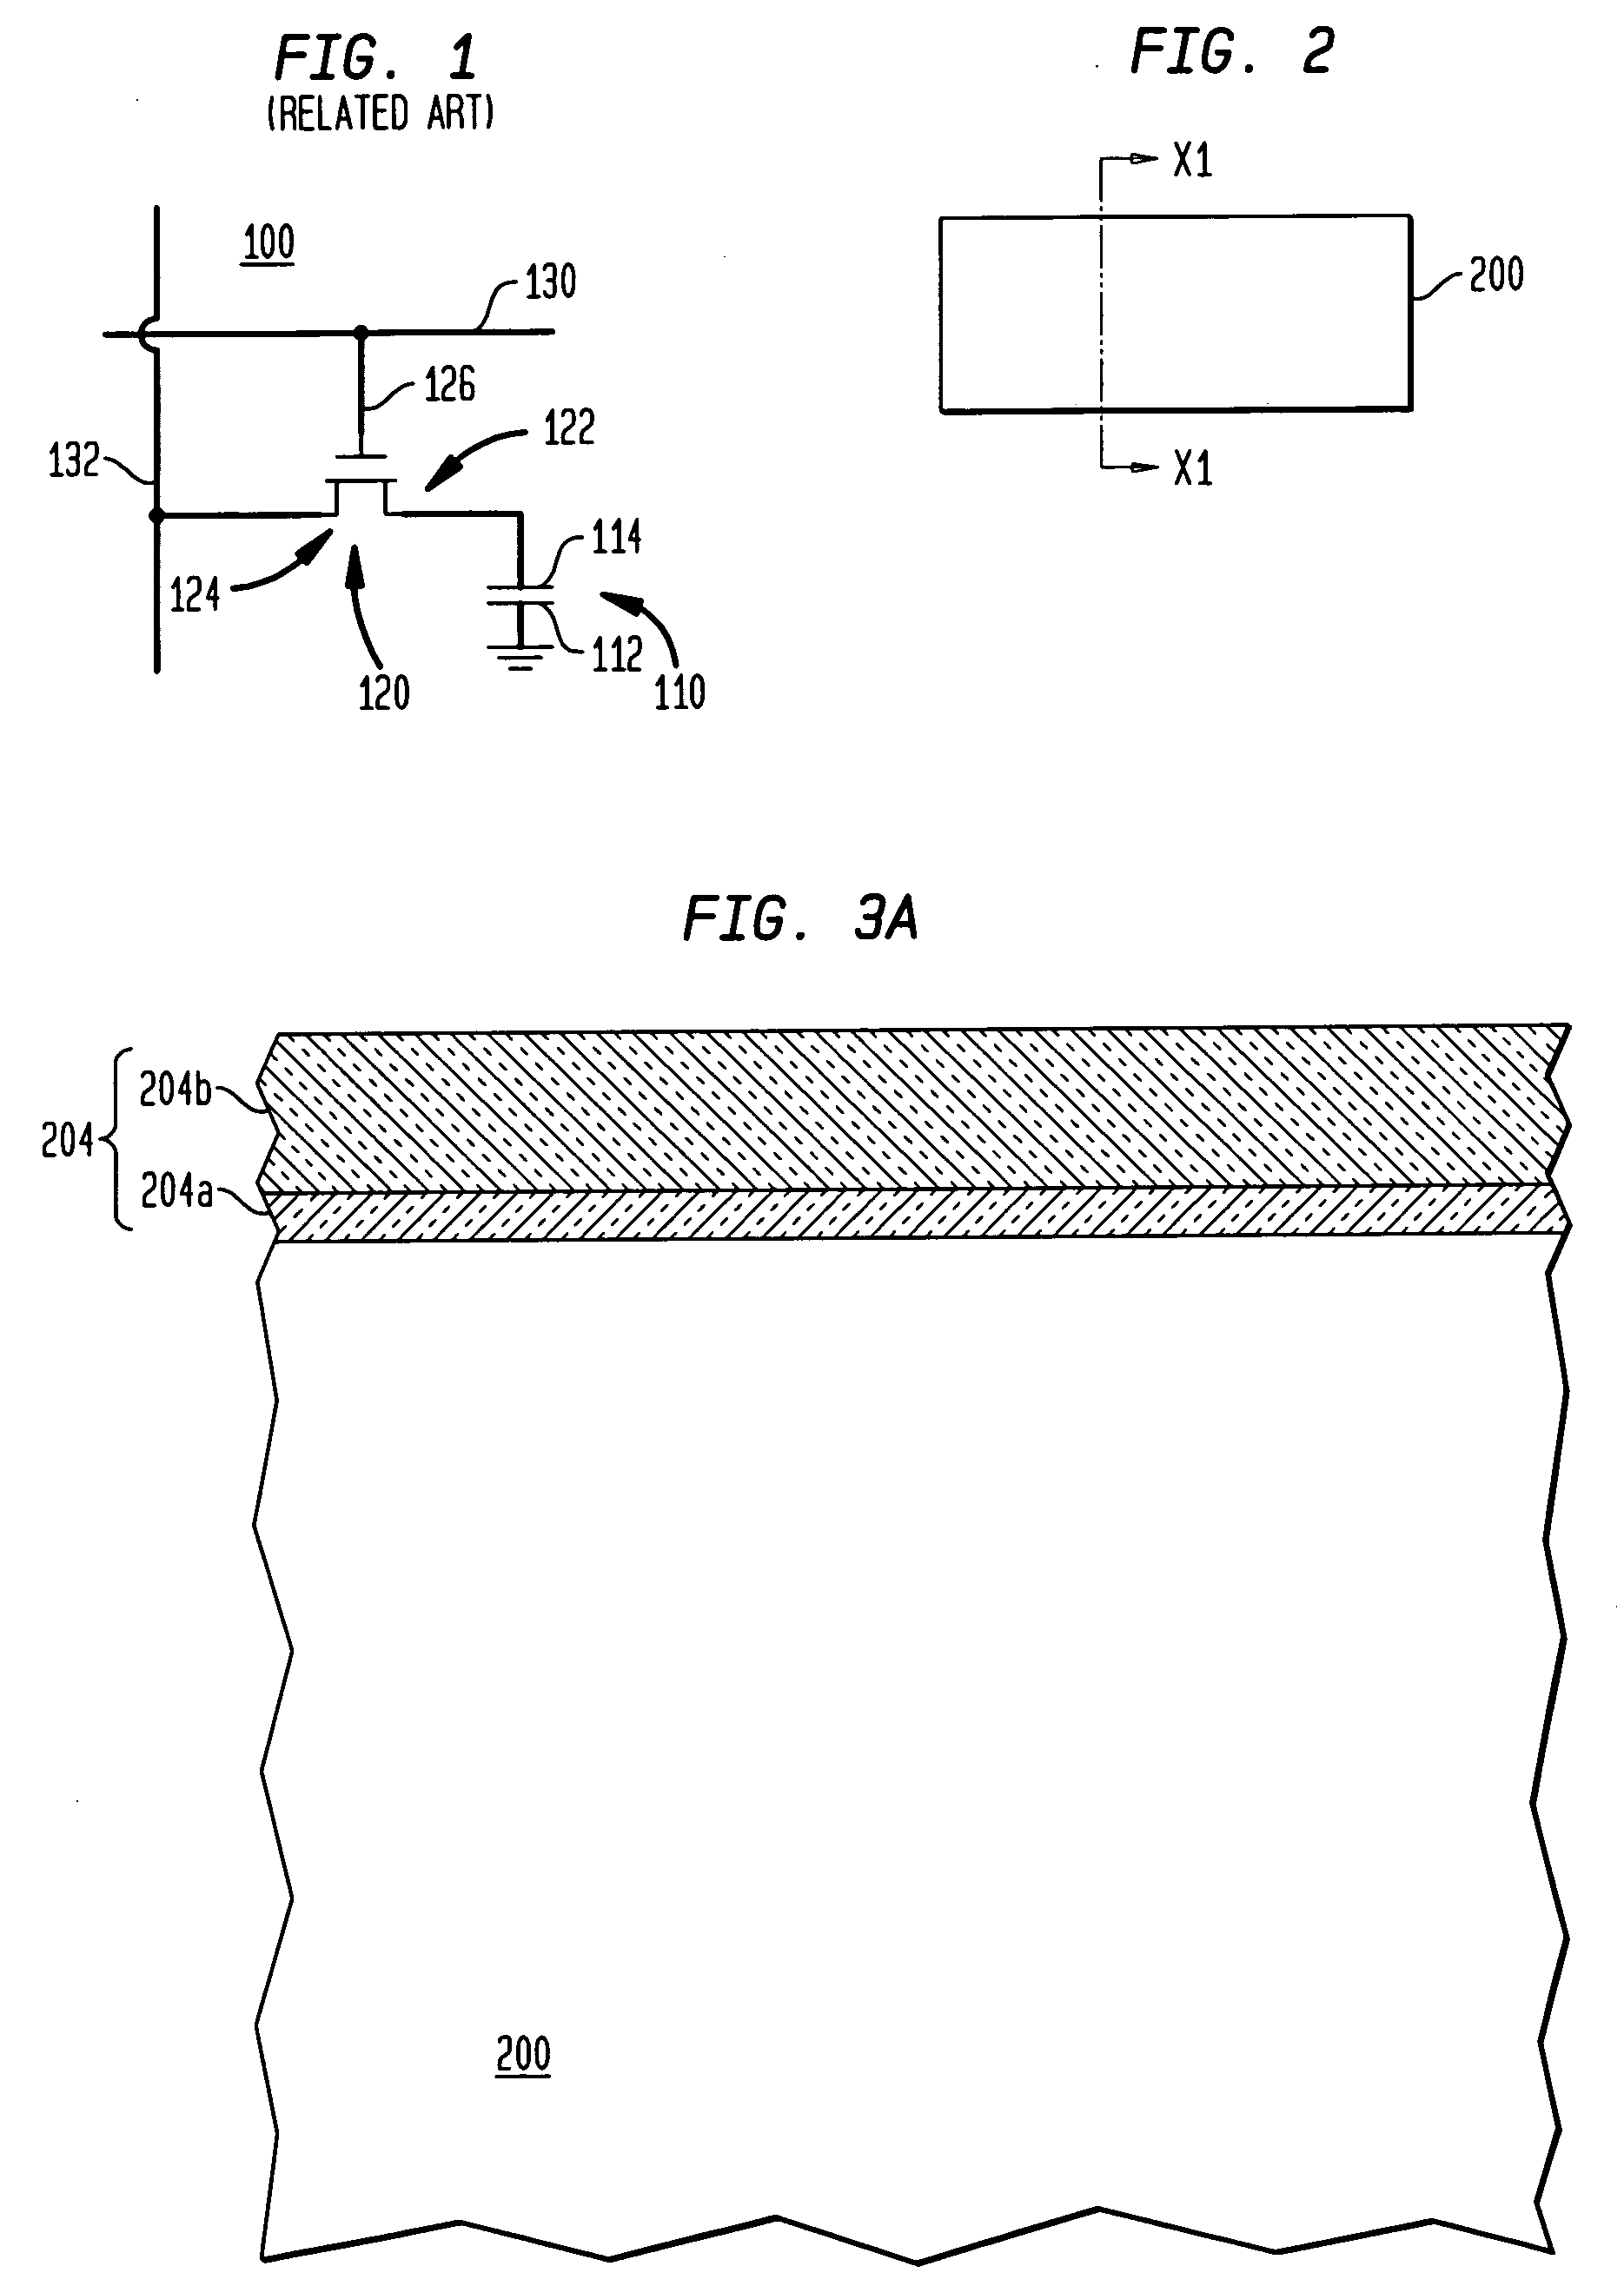 Encapsulated spacers in vertical pass gate dram and damascene logic gates